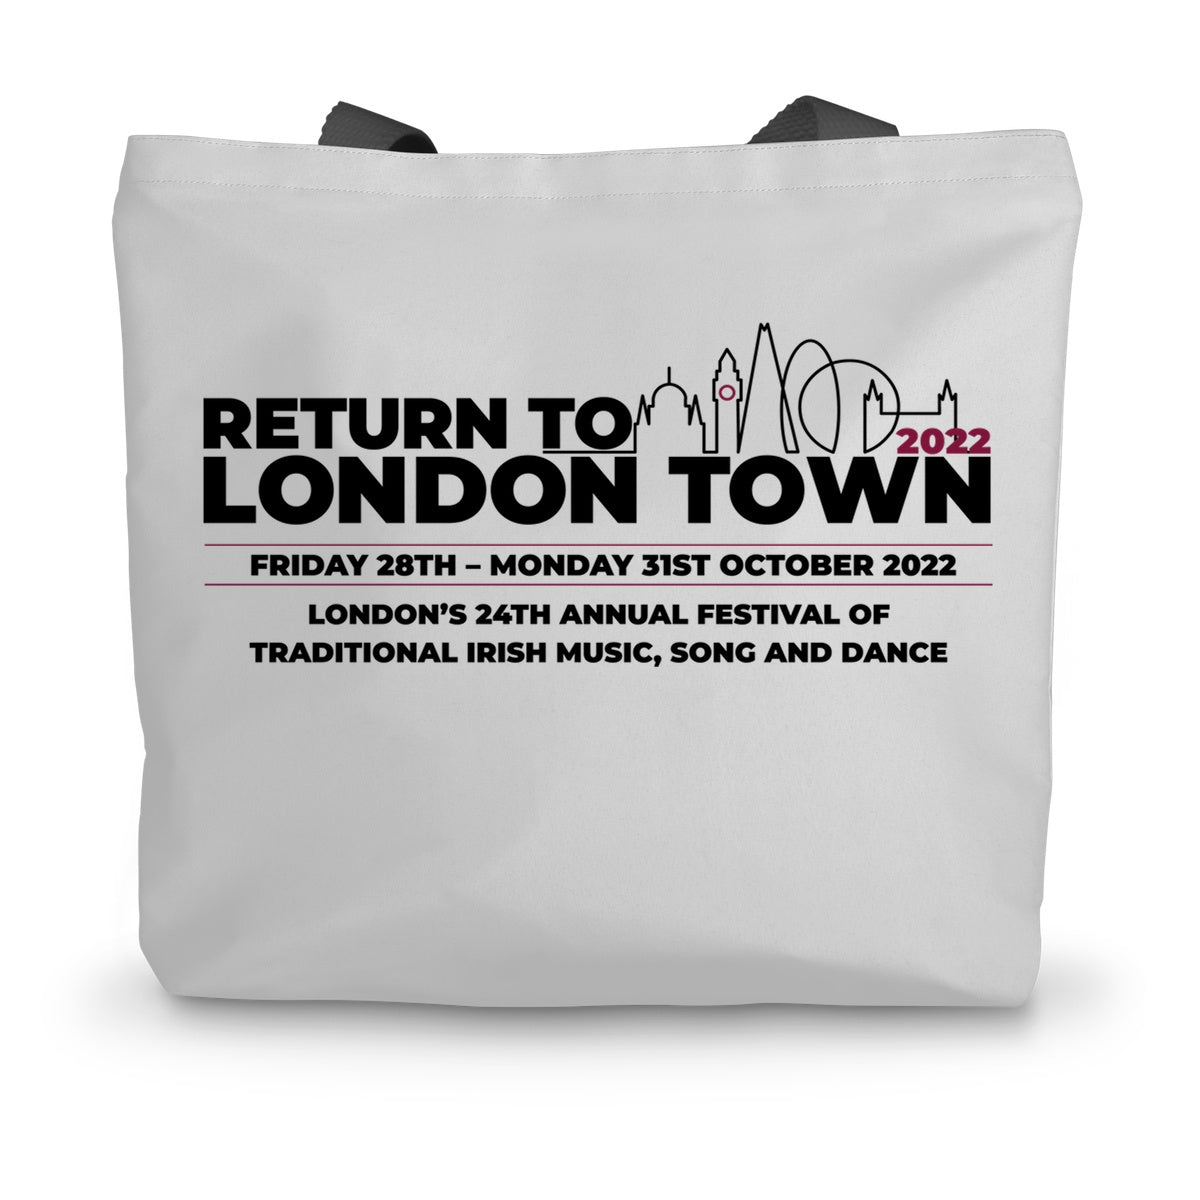 Return to London Town 2022 Canvas Tote Bag